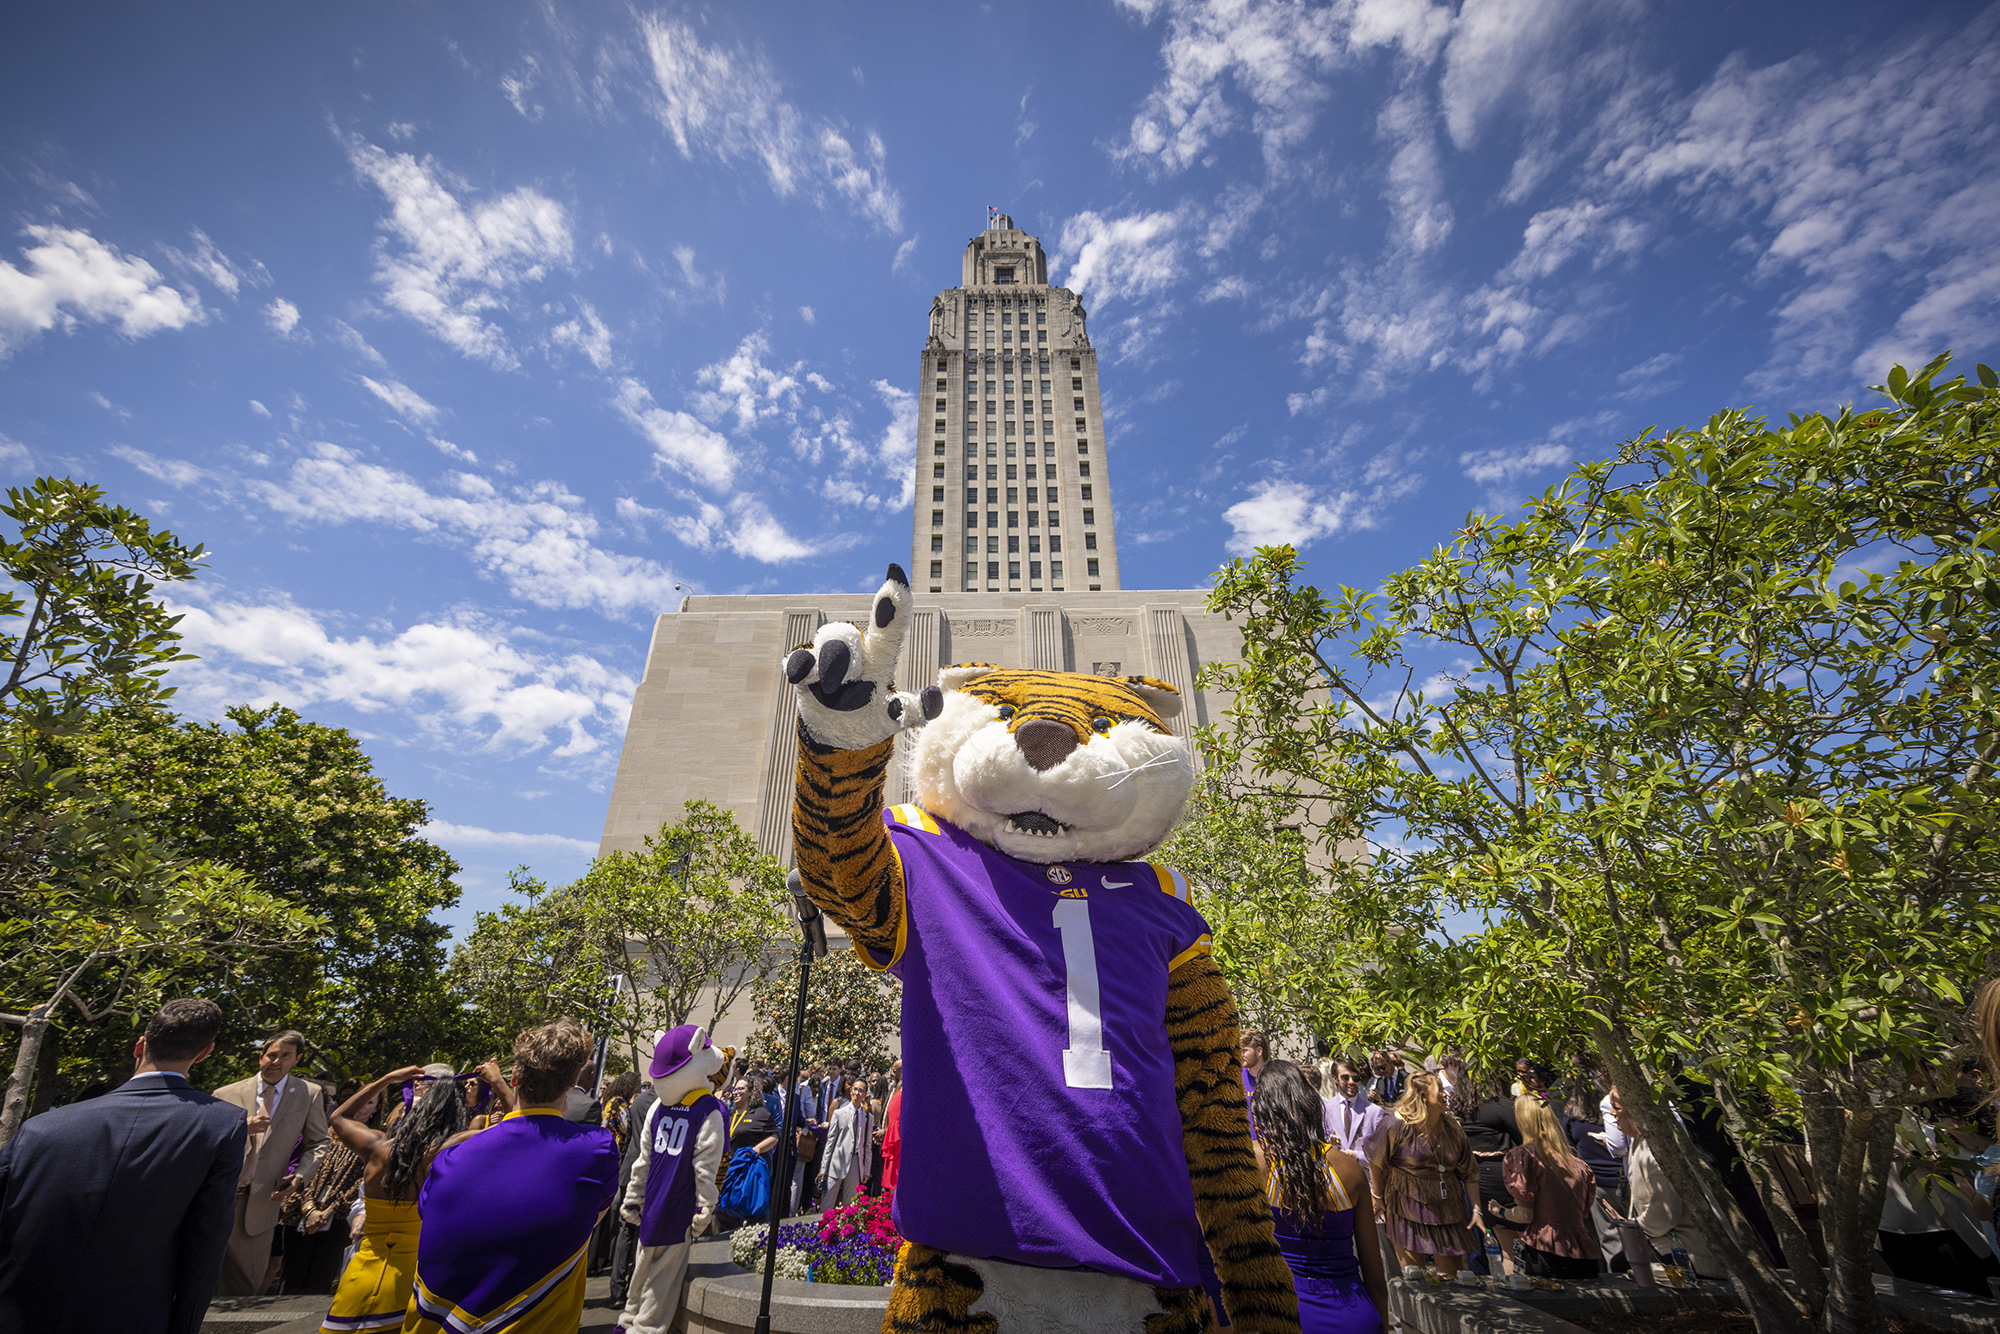 Mike the Tiger mascot, dressed in a purple #1 jersey, waves to the camera in front of the Louisiana State Capitol